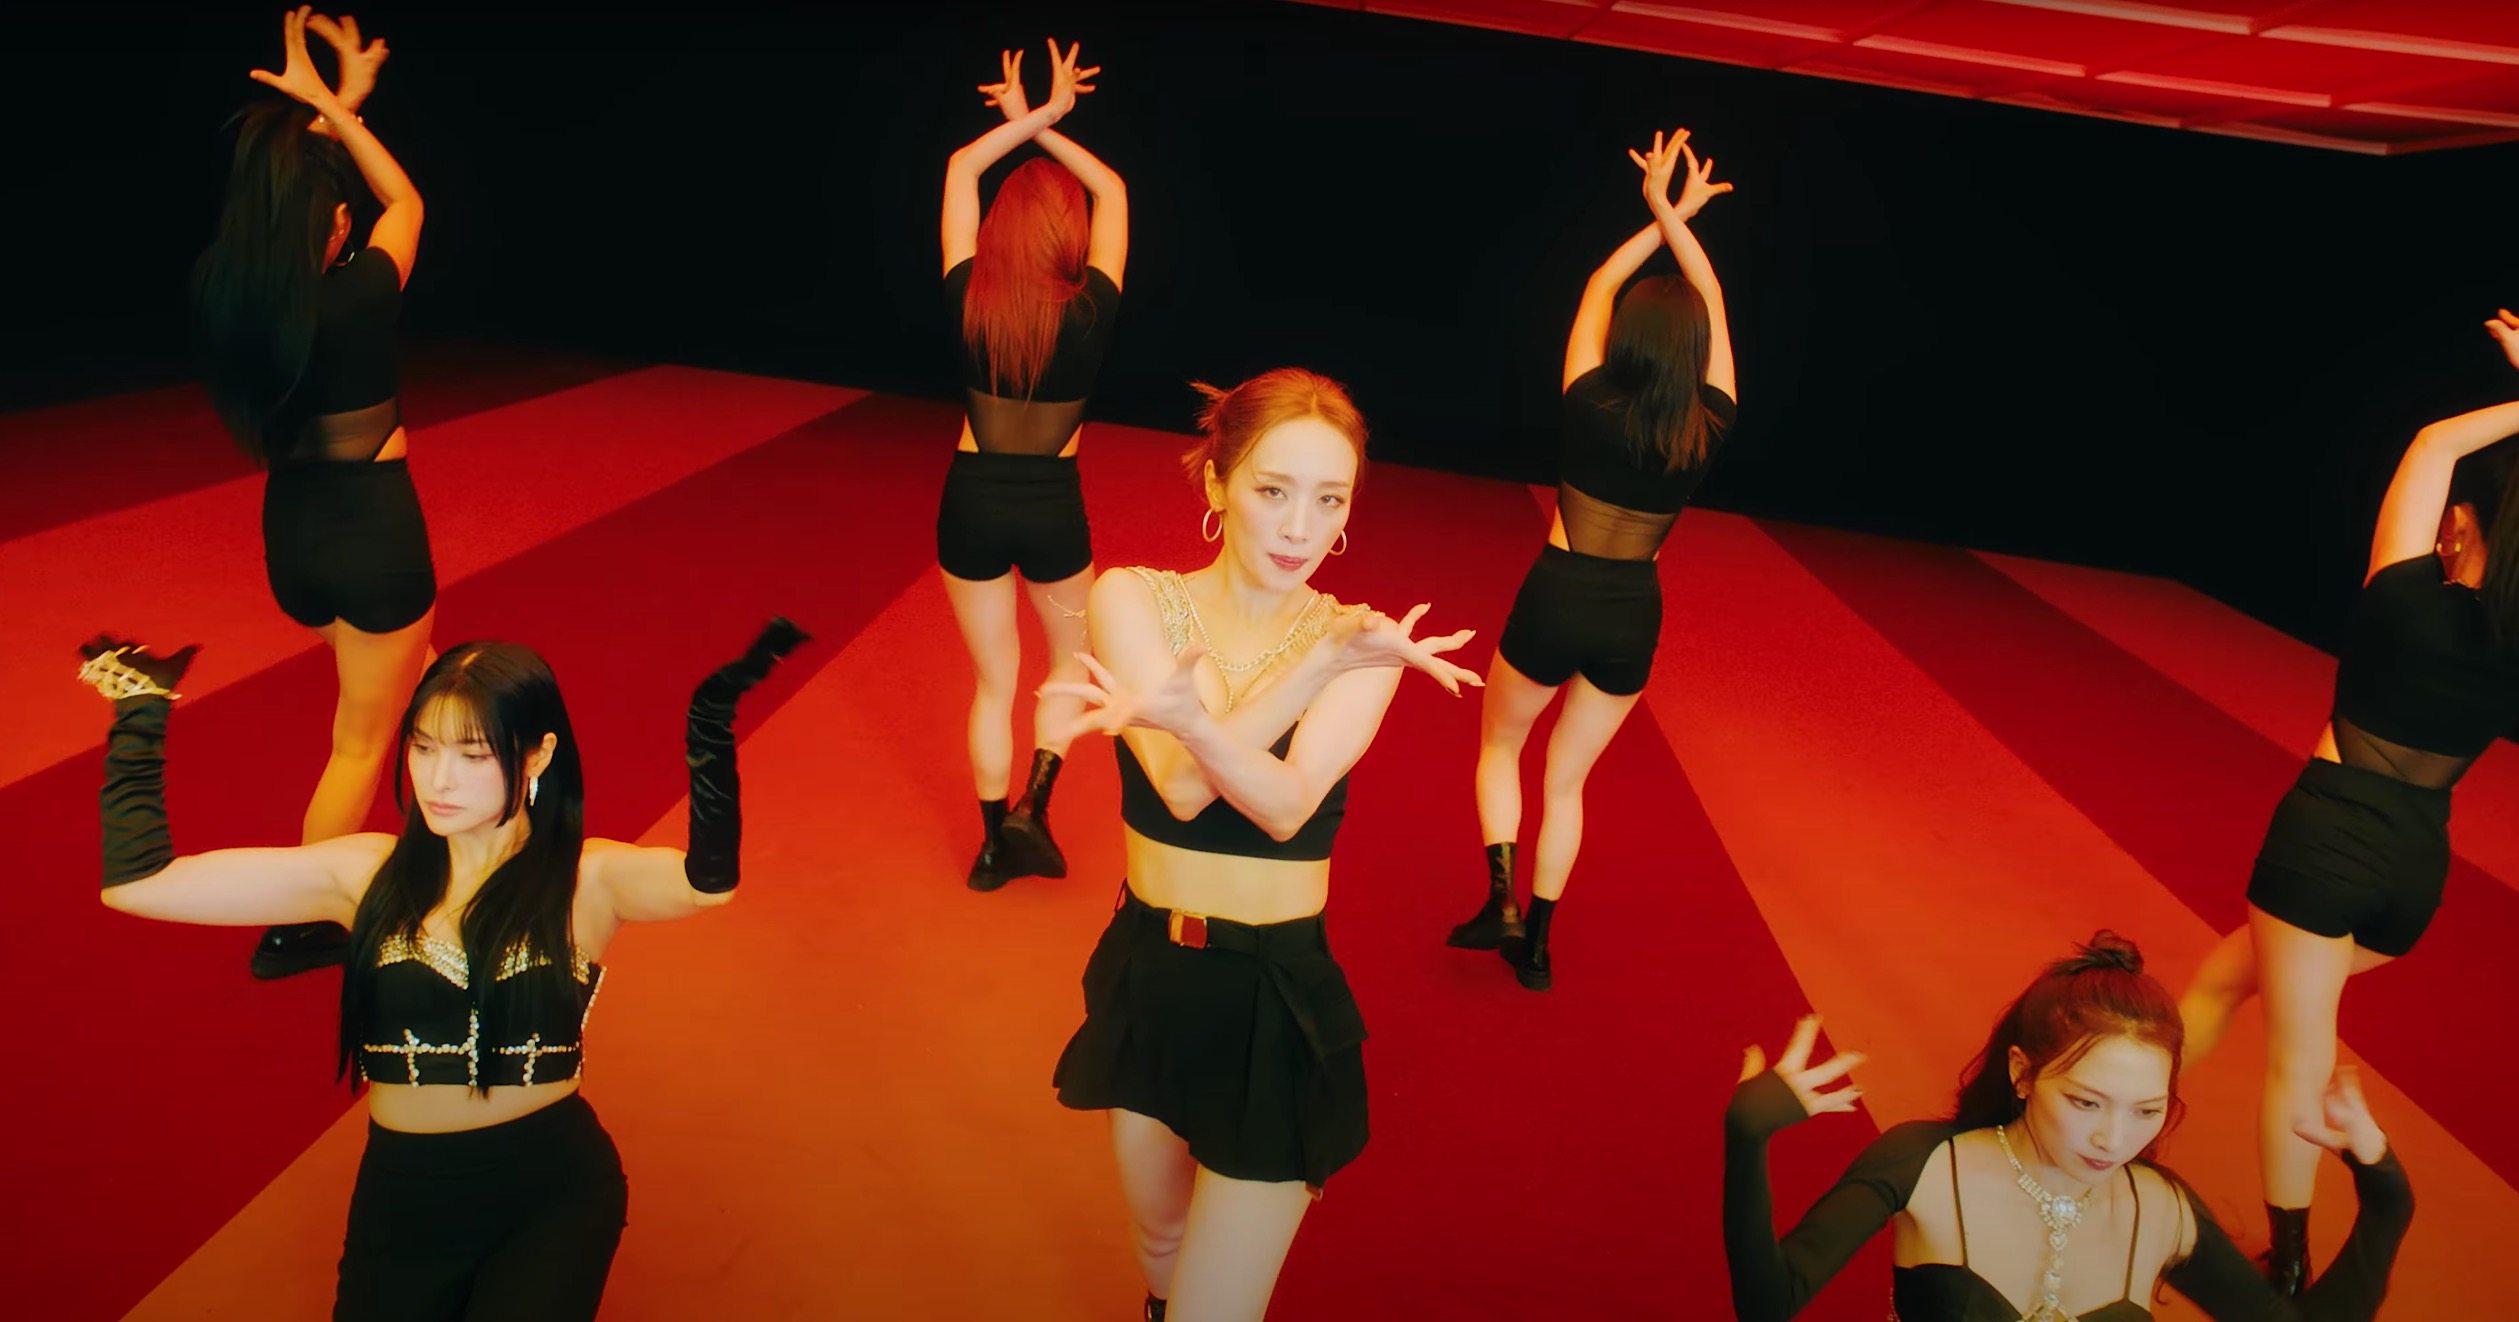 K-pop girl group Kara are back in the limelight with a new album, Move Again. Photo: YouTube/ Kara